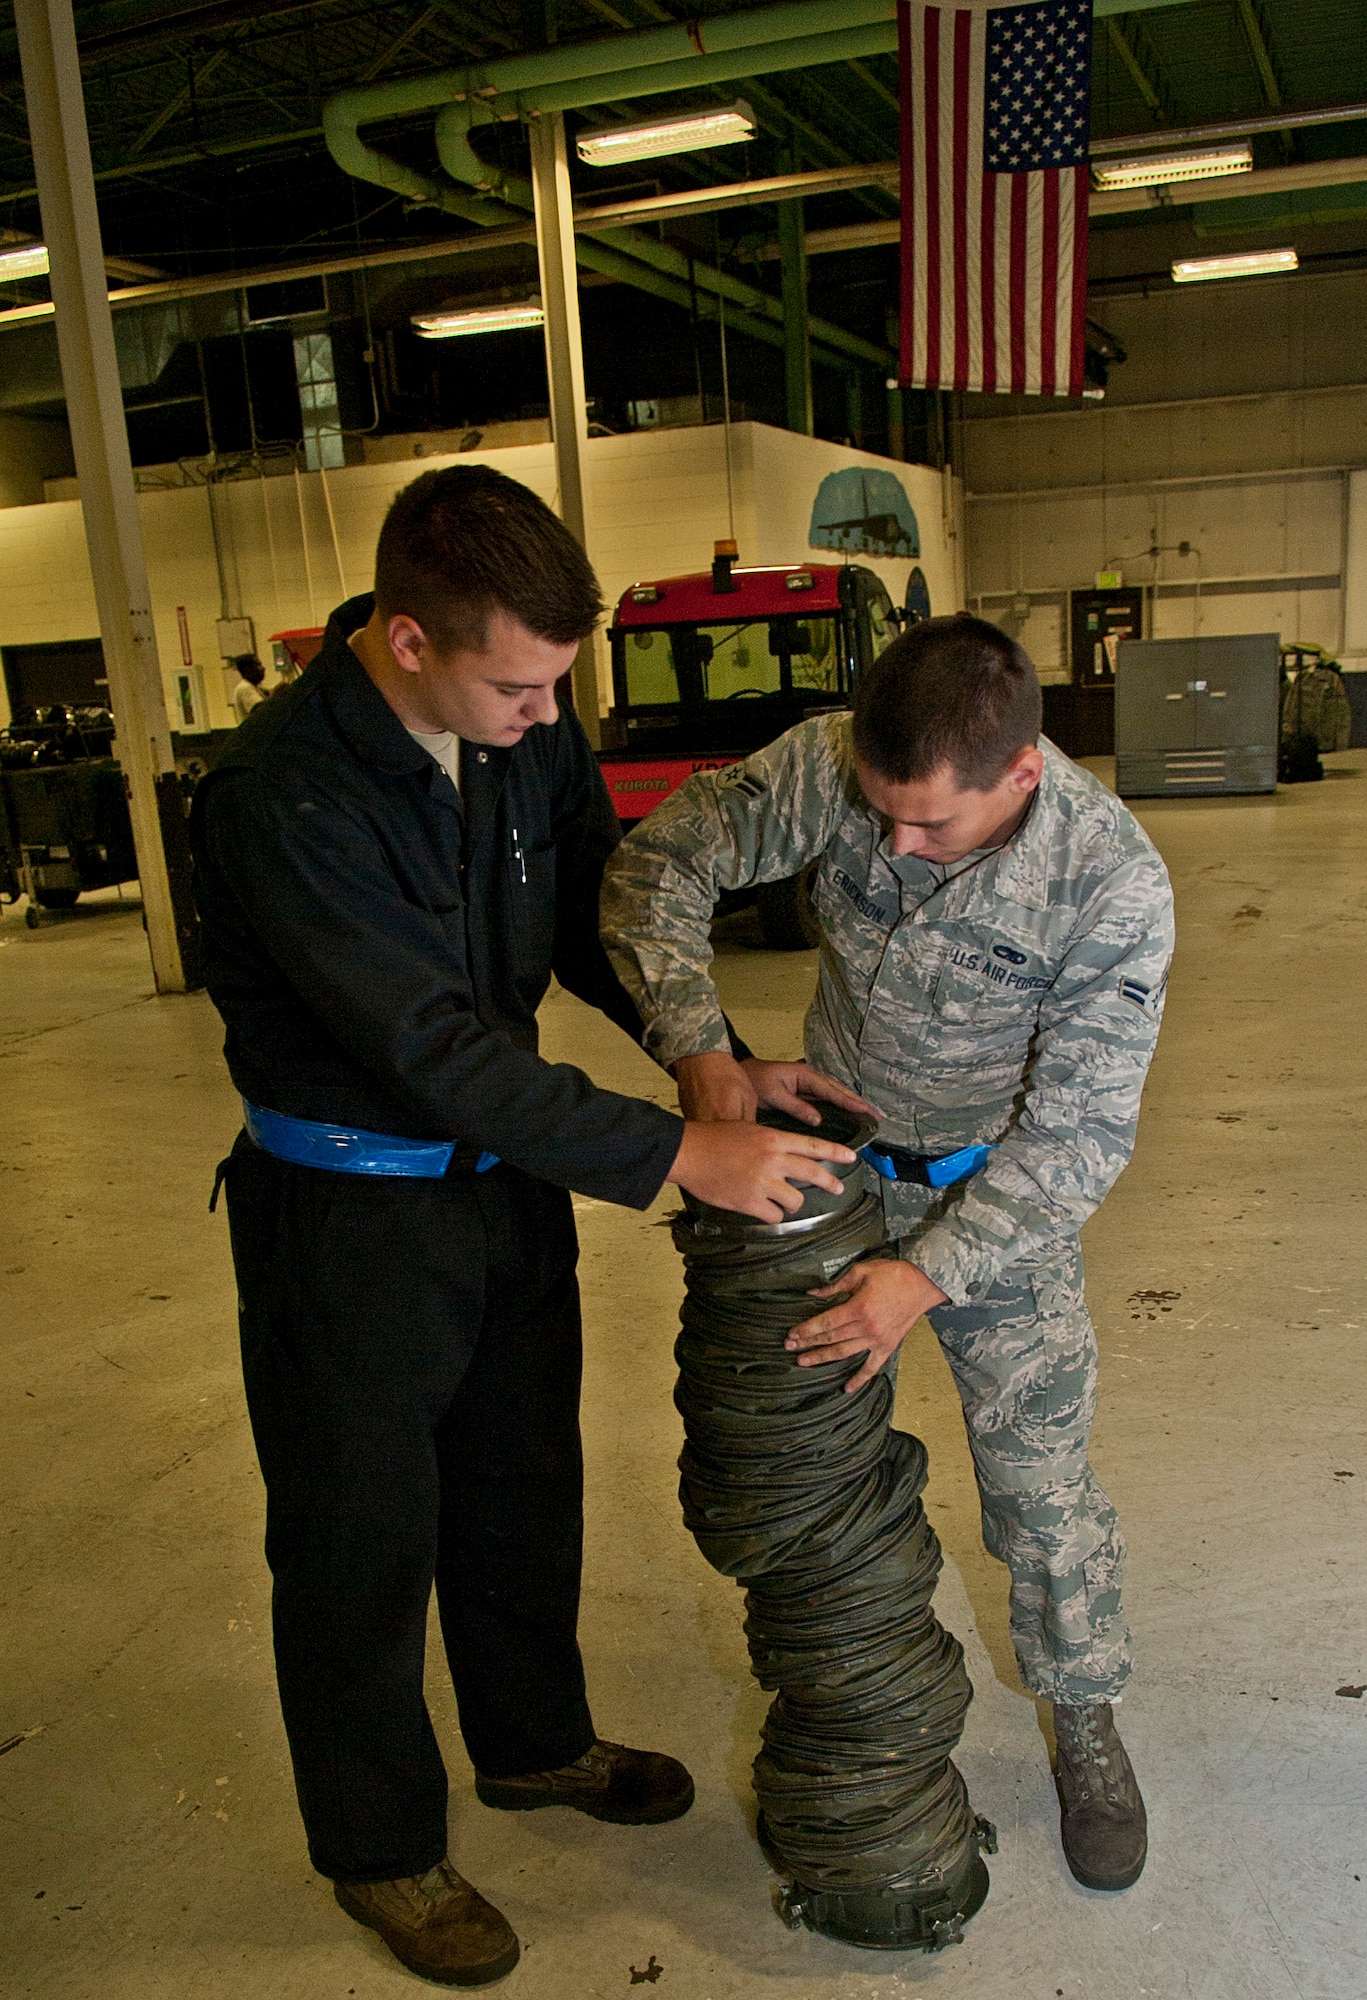 (From left) Airman 1st Class Michael Billen, 5th Maintenance Squadron aerospace ground equipment apprentice, and Airman 1st Class Thomas Erickson, 5 MXS AGE diesel mechanic, connect two air ducts at Minot Air Force Base, N.D., Oct. 5, 2016. Air ducts connect to an MA-3D air conditioner which are used to transfer cold air to aircraft. (U.S. Air Force photo/Airman 1st Class Jonathan McElderry)